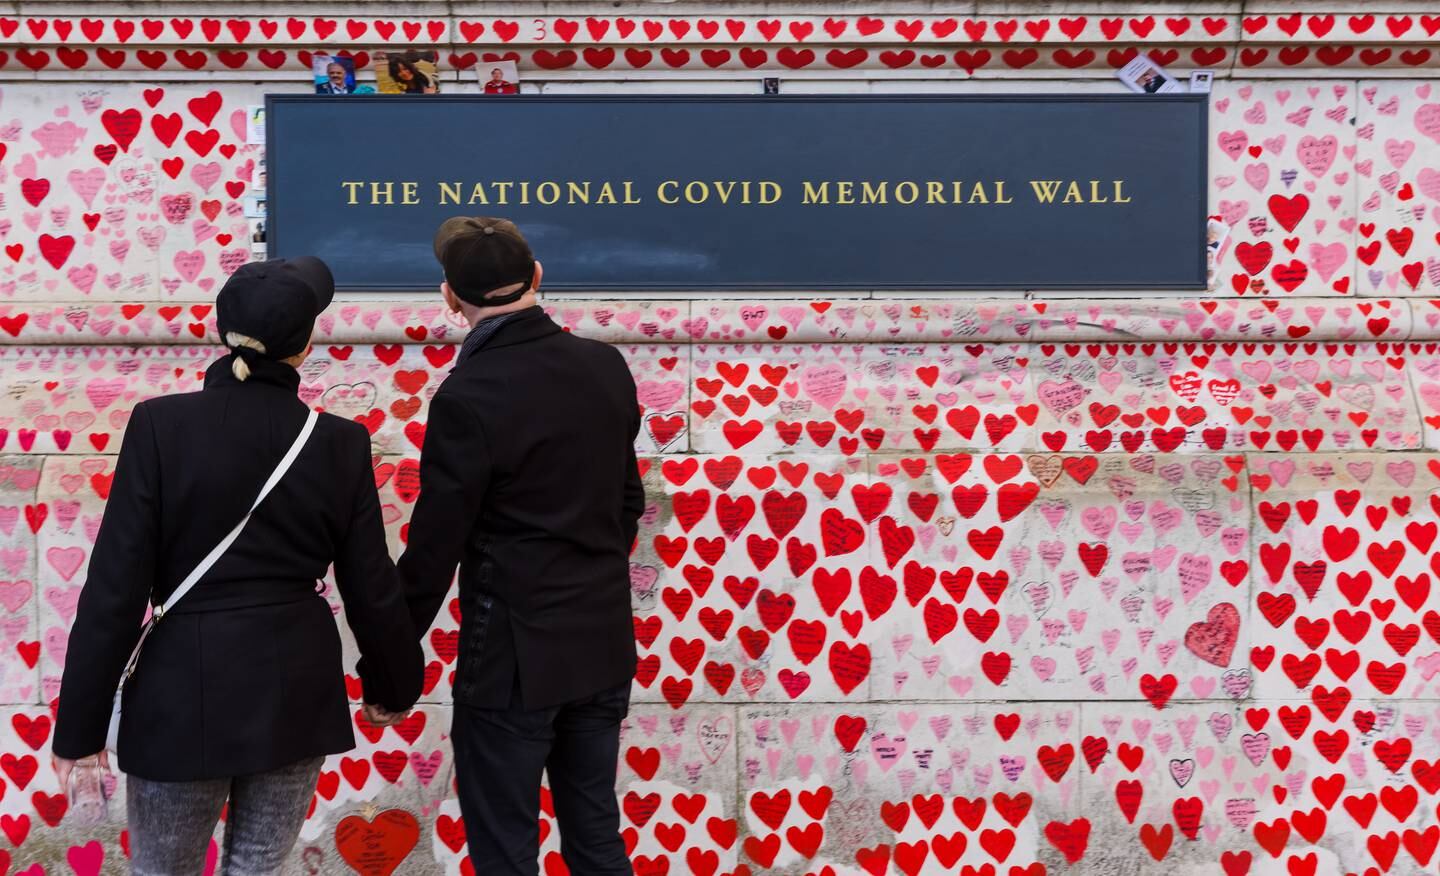 People look at tributes to those who died of Covid-19 in the UK, at the National Covid Memorial Wall in London. EPA 